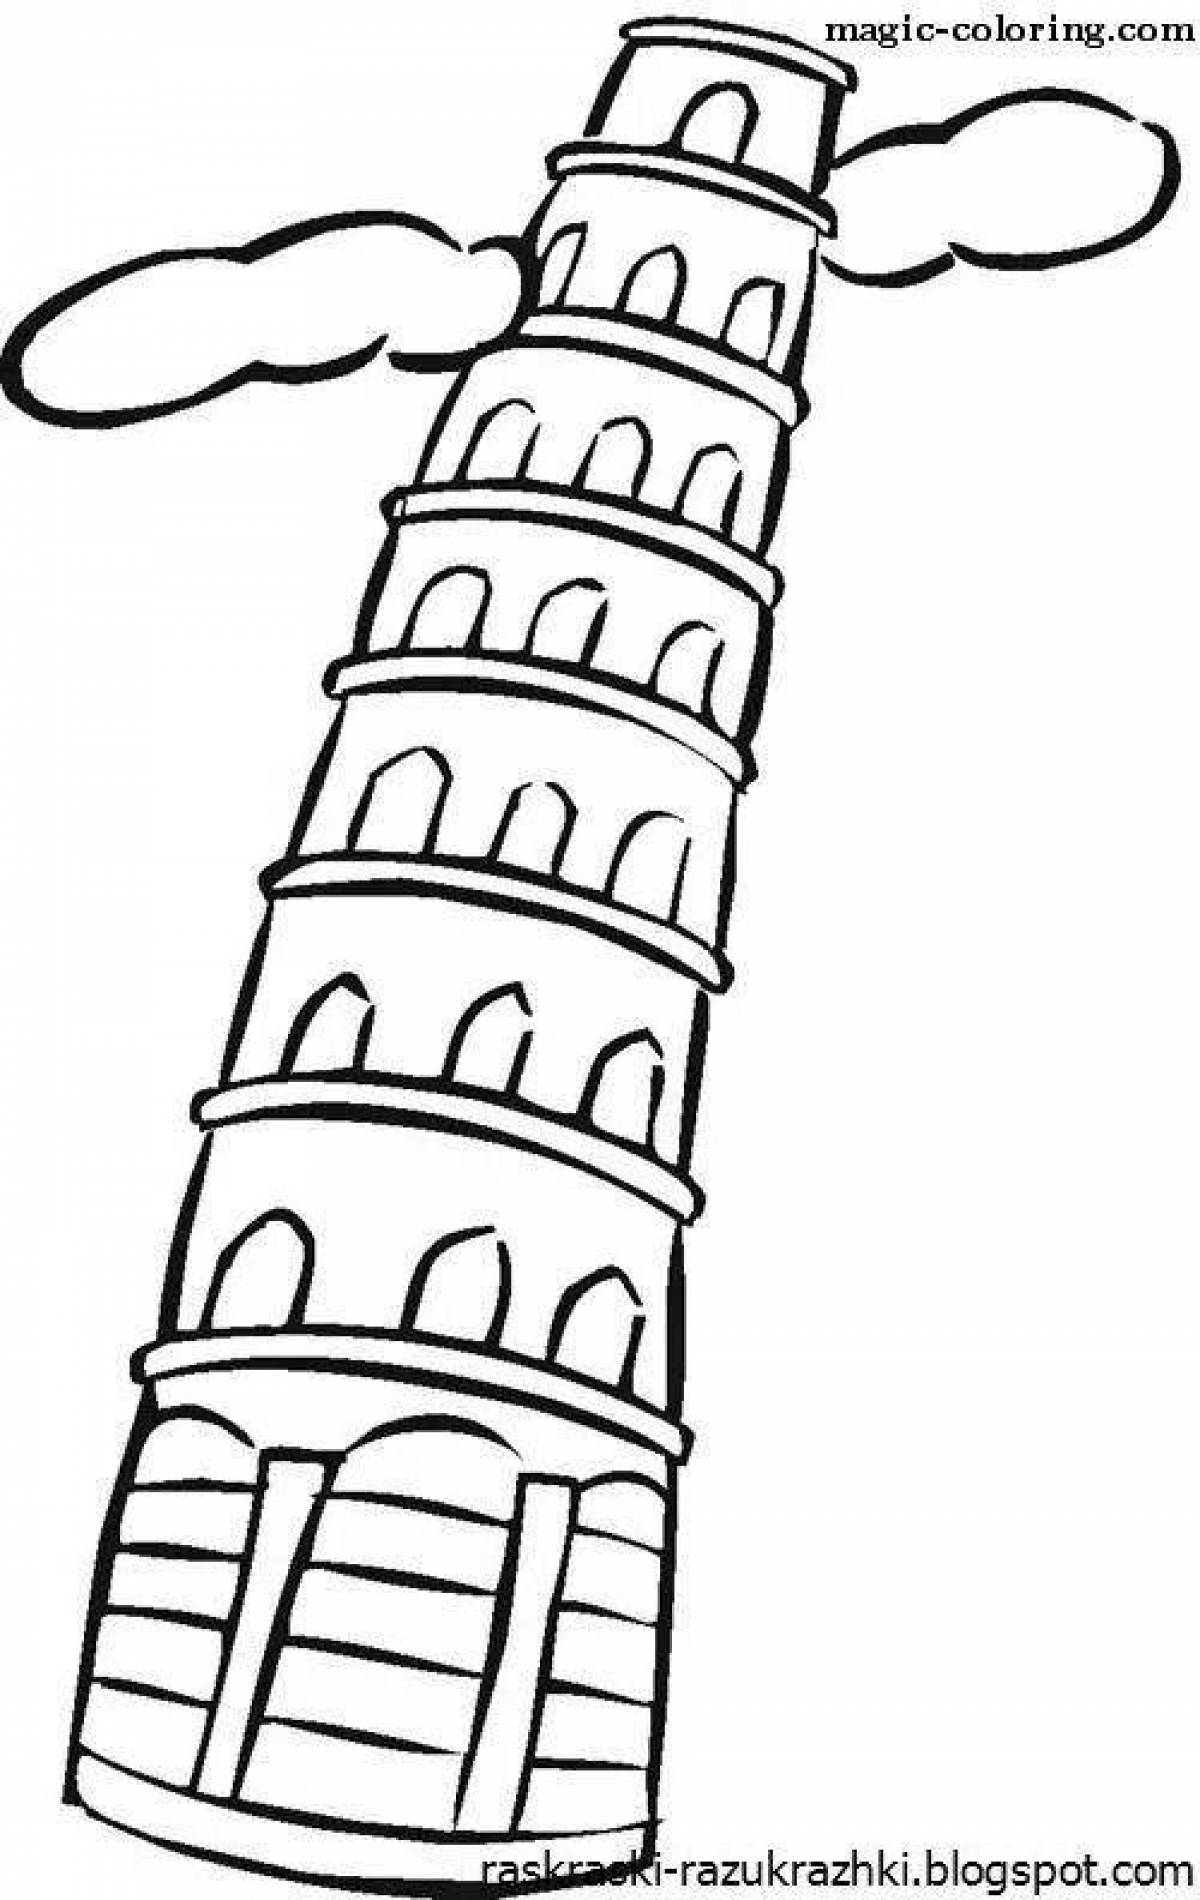 Beautiful coloring of the Leaning Tower of Pisa